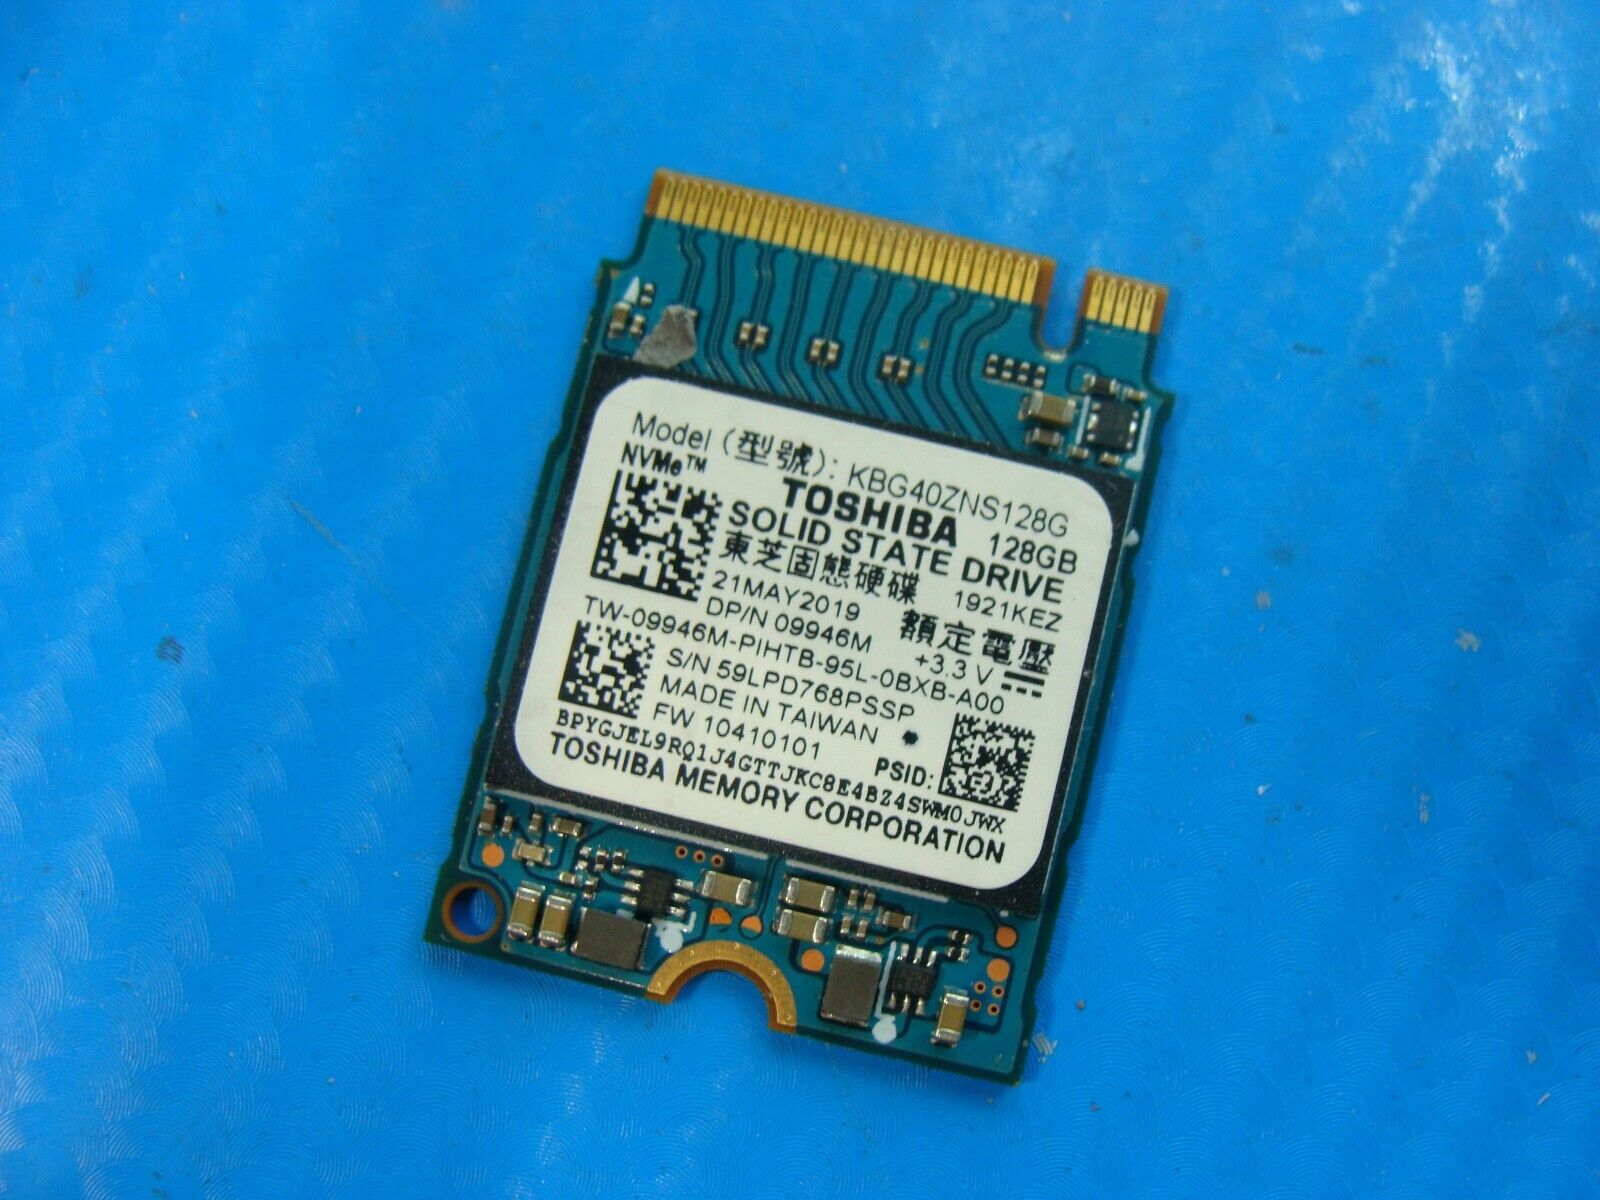 Dell 5401 Toshiba 128GB M.2 NVMe SSD Solid State Drive KBG40ZNS128G 9946M